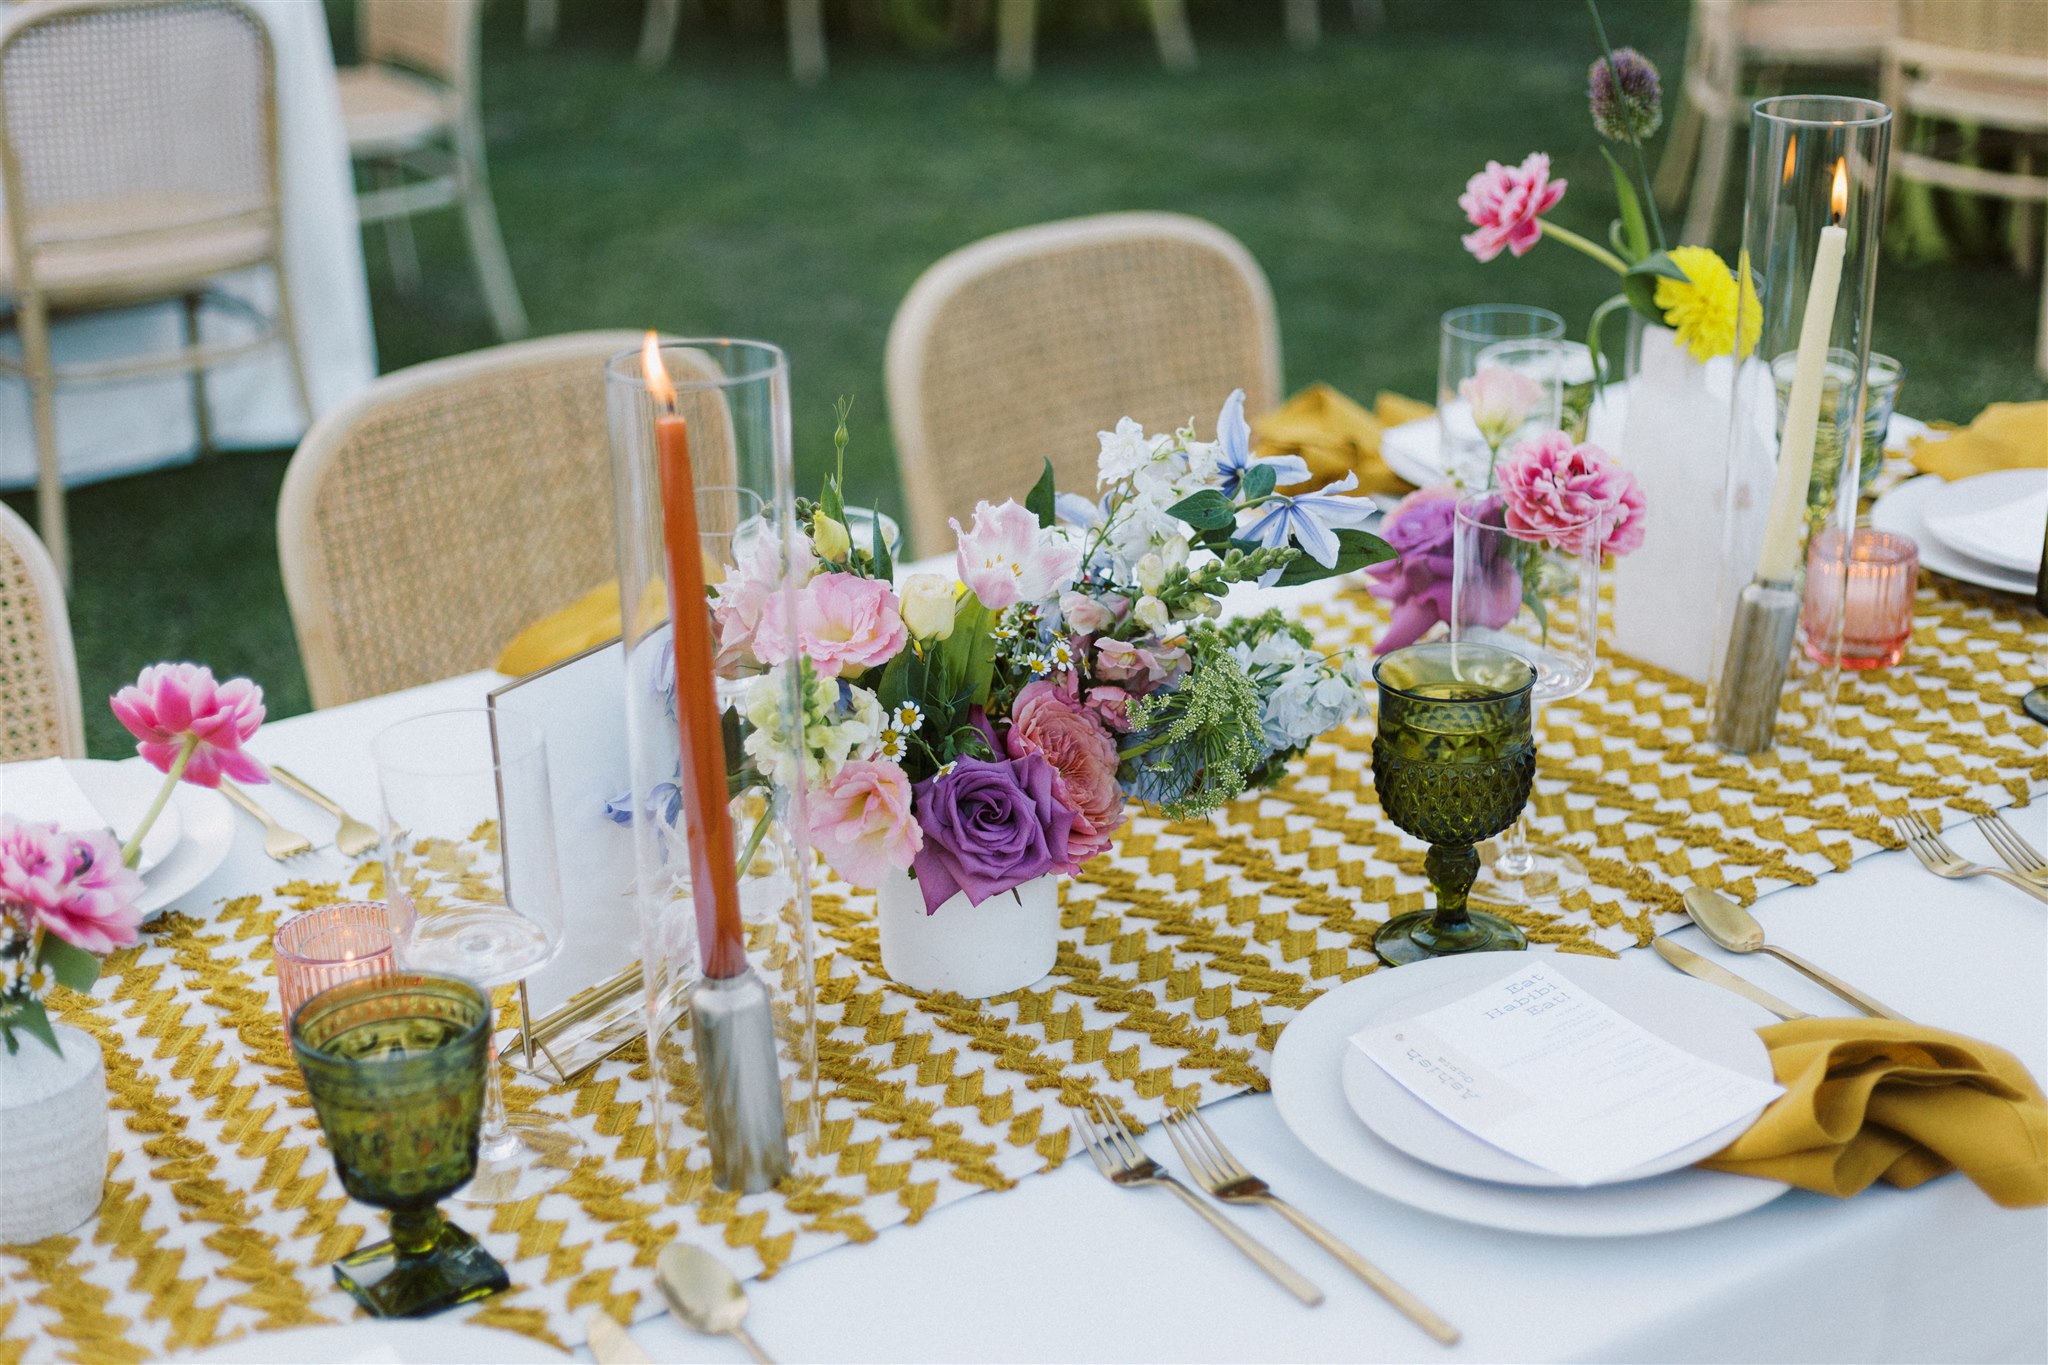 This beautiful tablescape was the perfect addition to this vibrant Palm Springs wedding reception. Our Green Wine Goblets add a nice touch to this table setting. Archive has everything you need for your event and wedding rentals in Palm Springs, Orange County, Los Angeles, and San Diego areas!